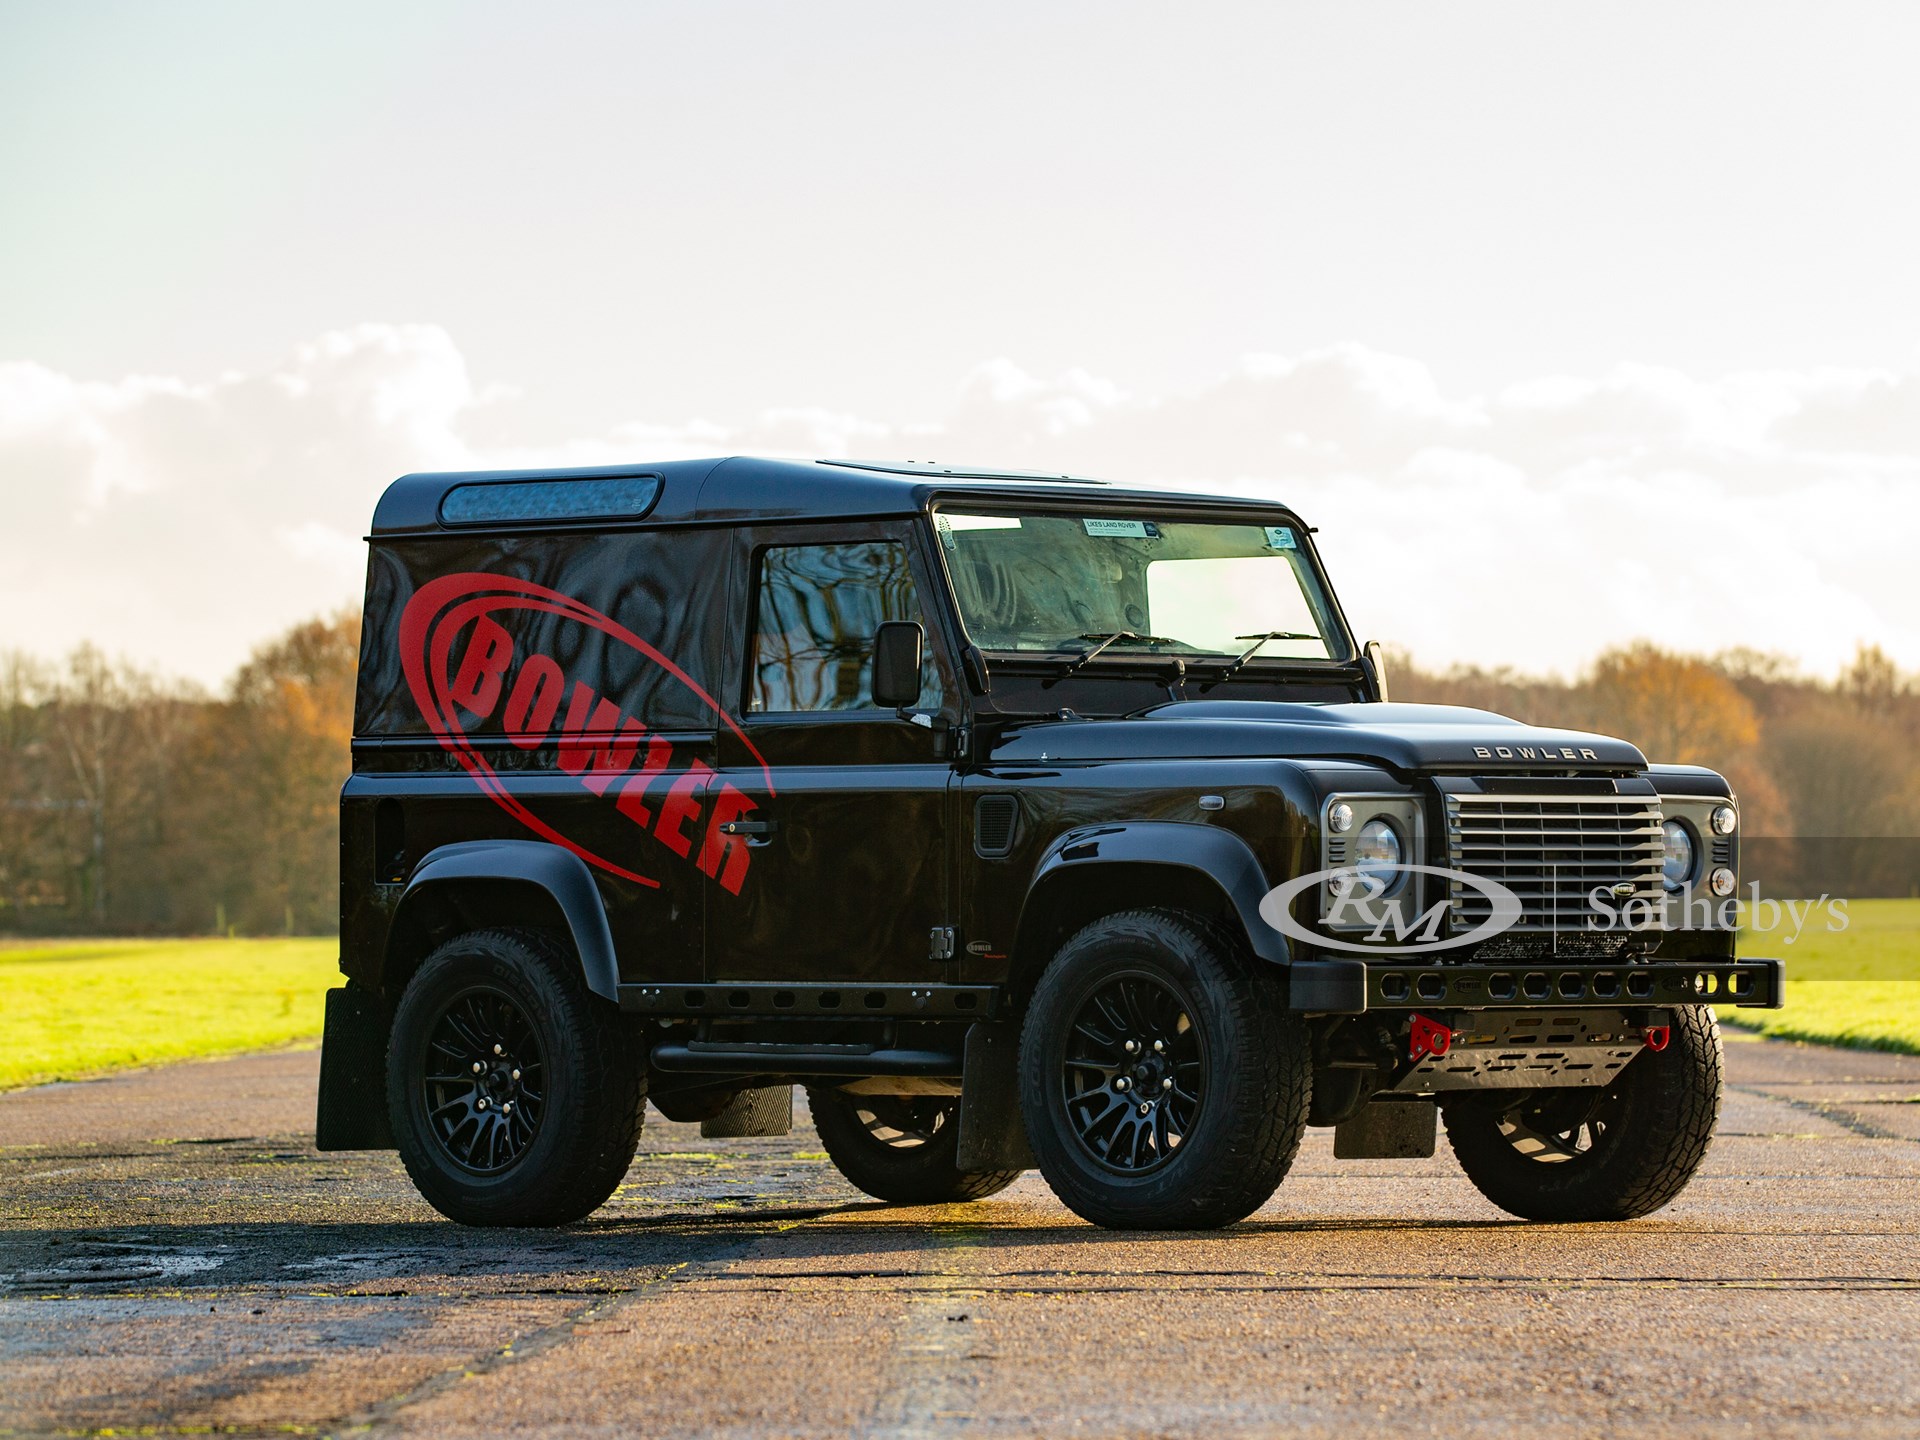 2015 Land Rover Defender 90 Hardtop XS by Bowler